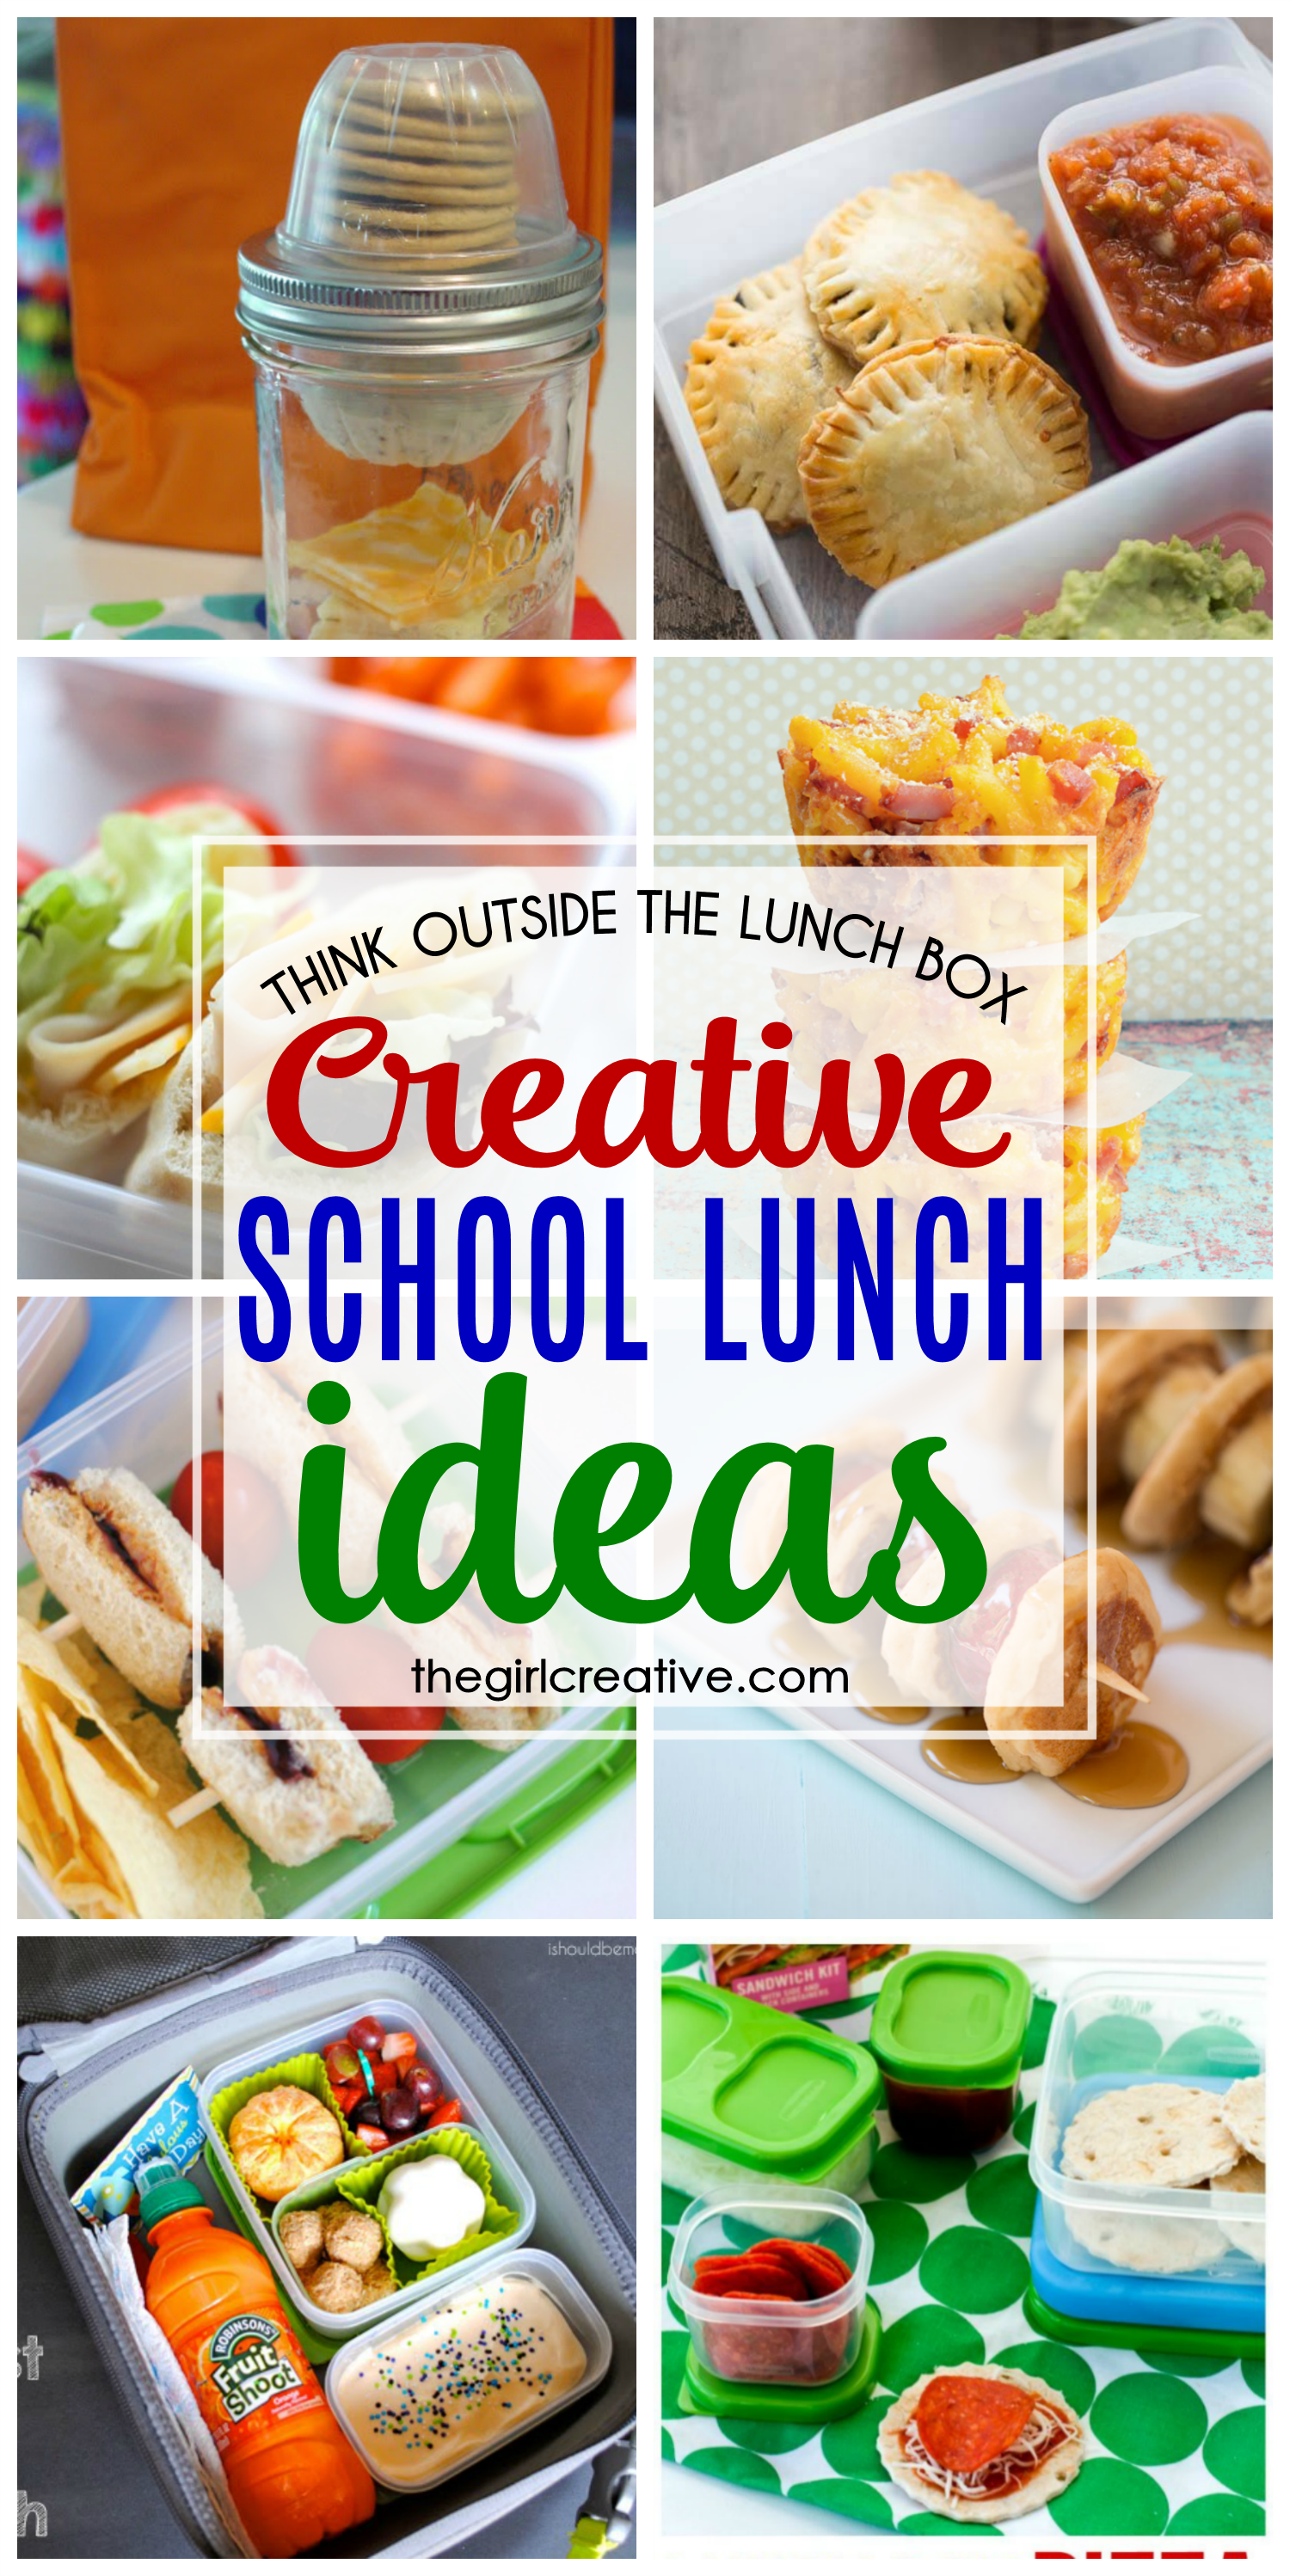 Think outside the lunch box with these creative school lunch ideas.